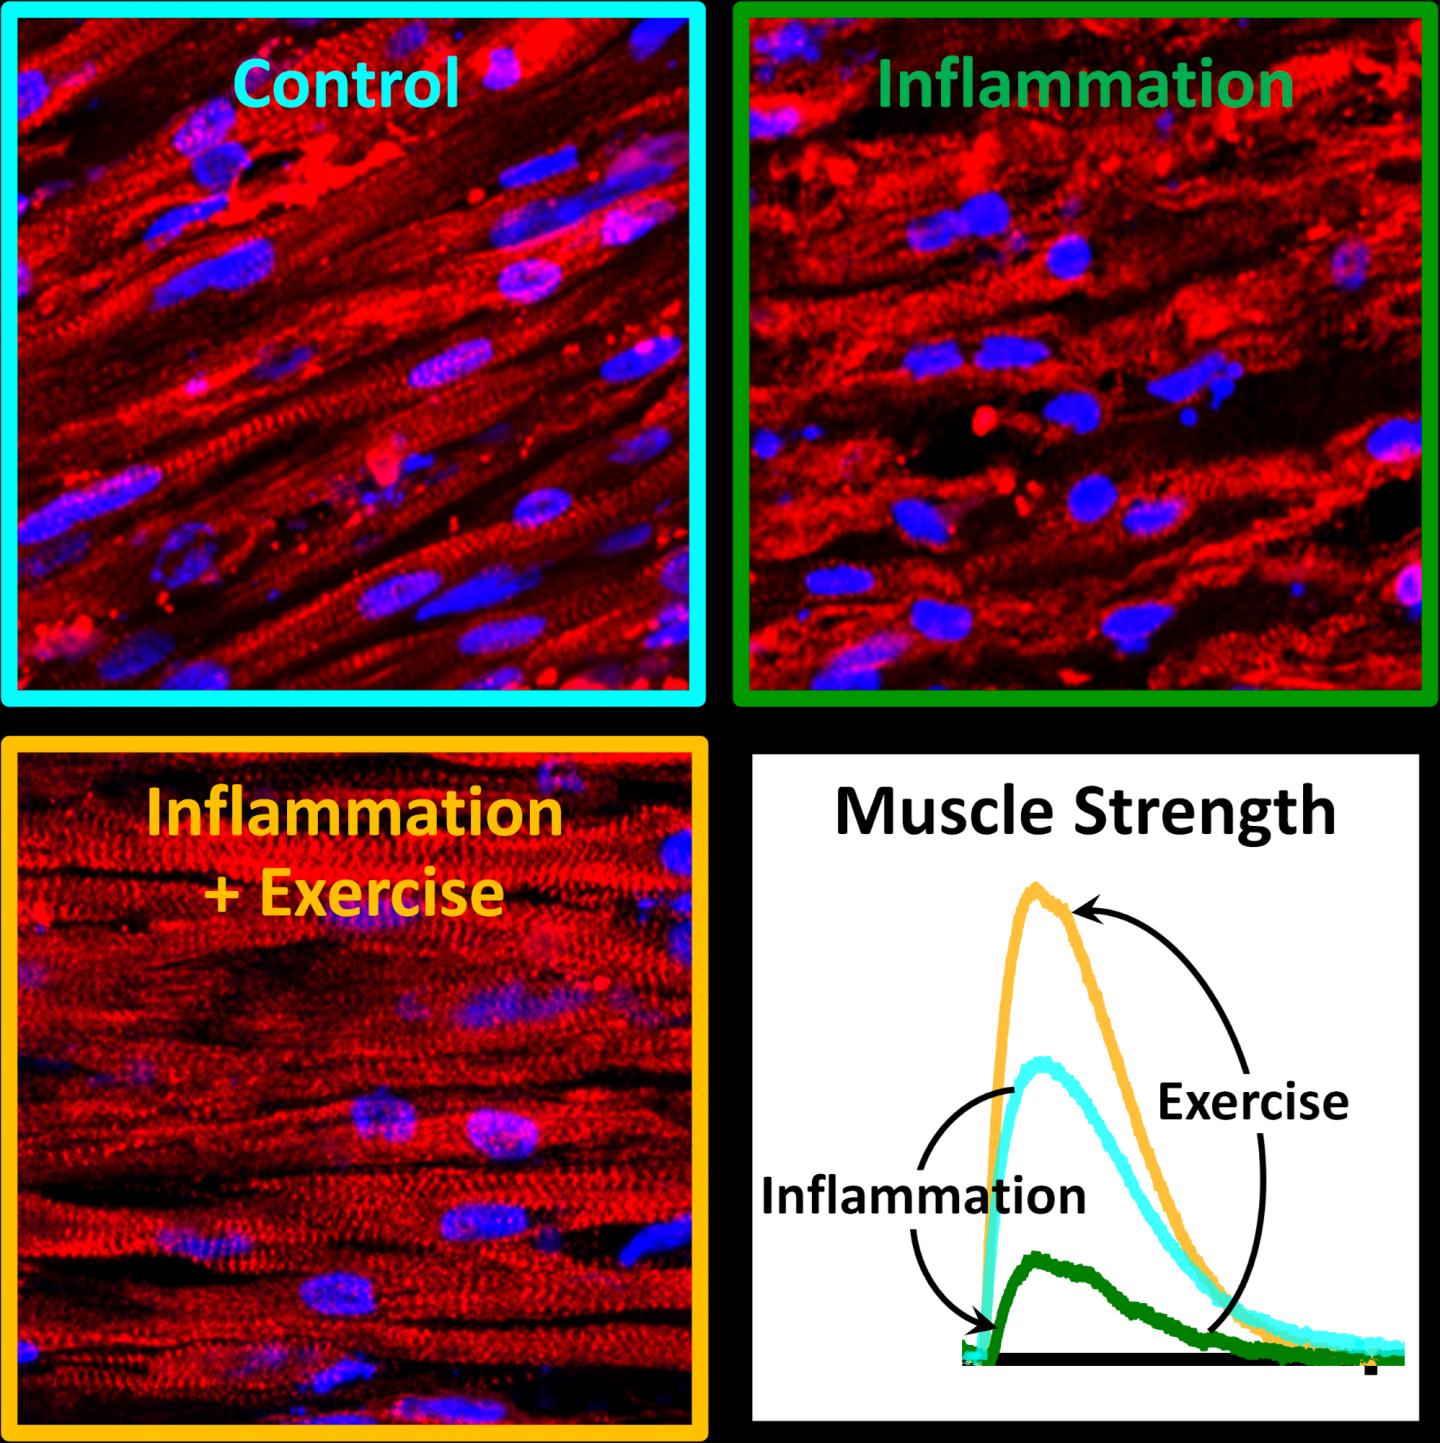 Inflammation and Exercise